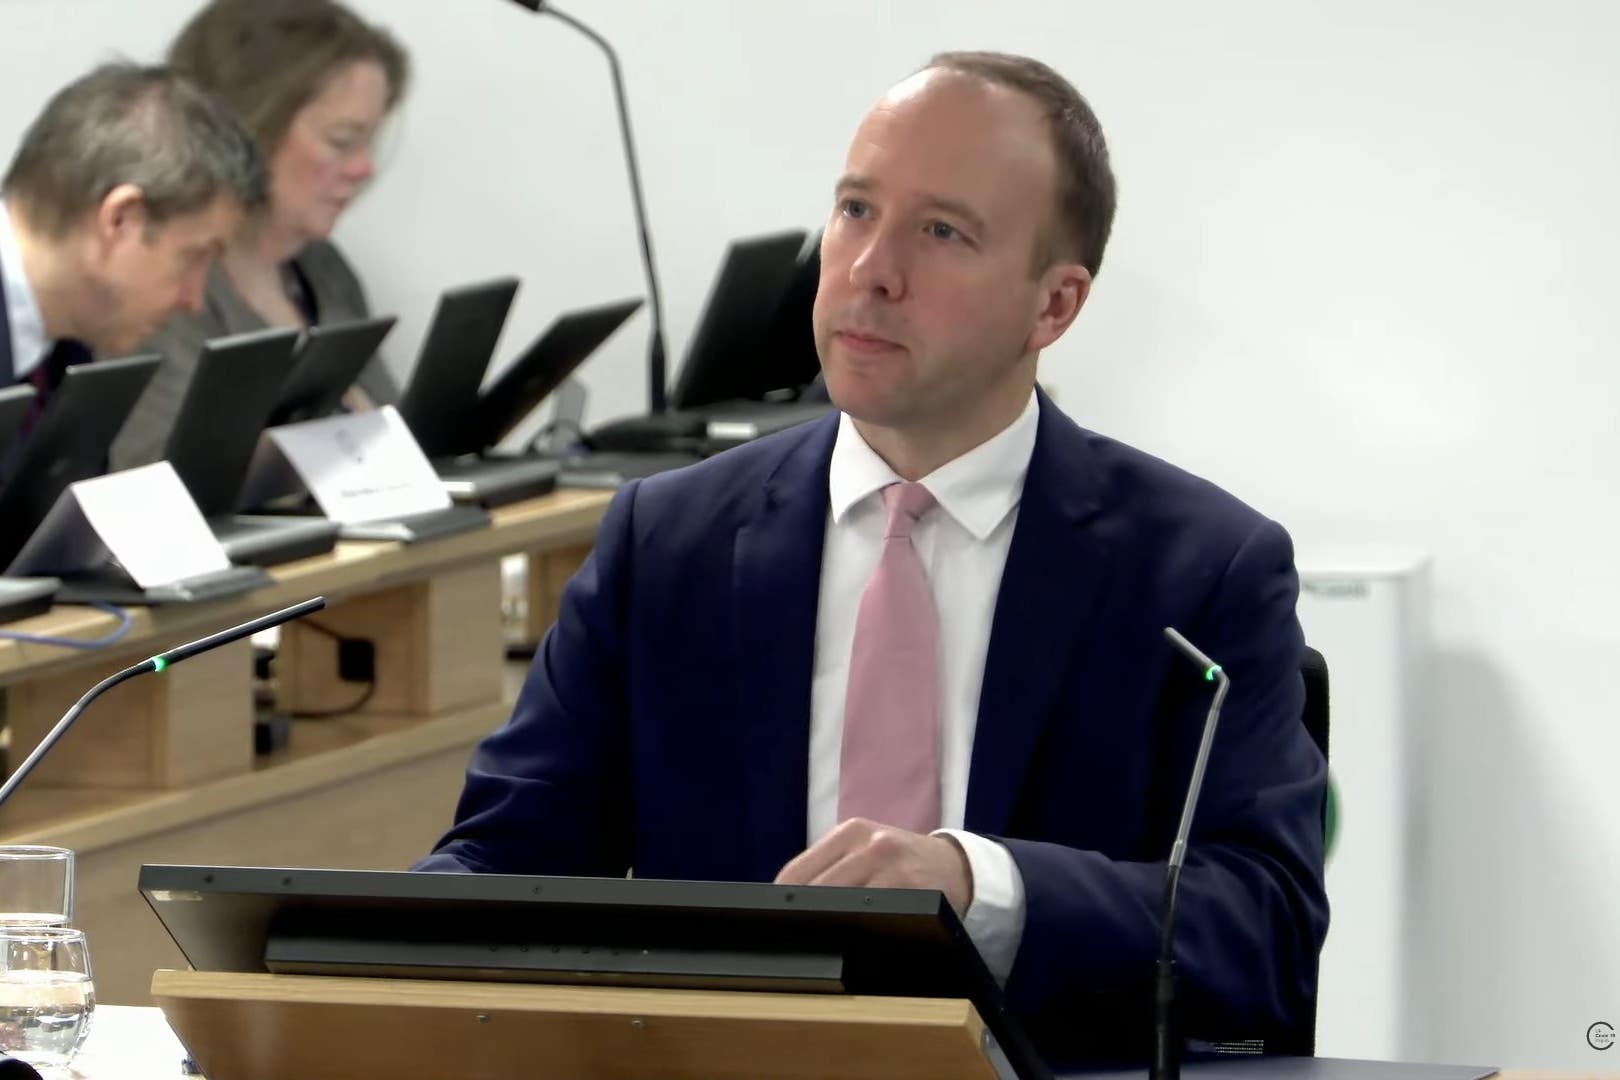 The former health secretary giving evidence at Dorland House in London